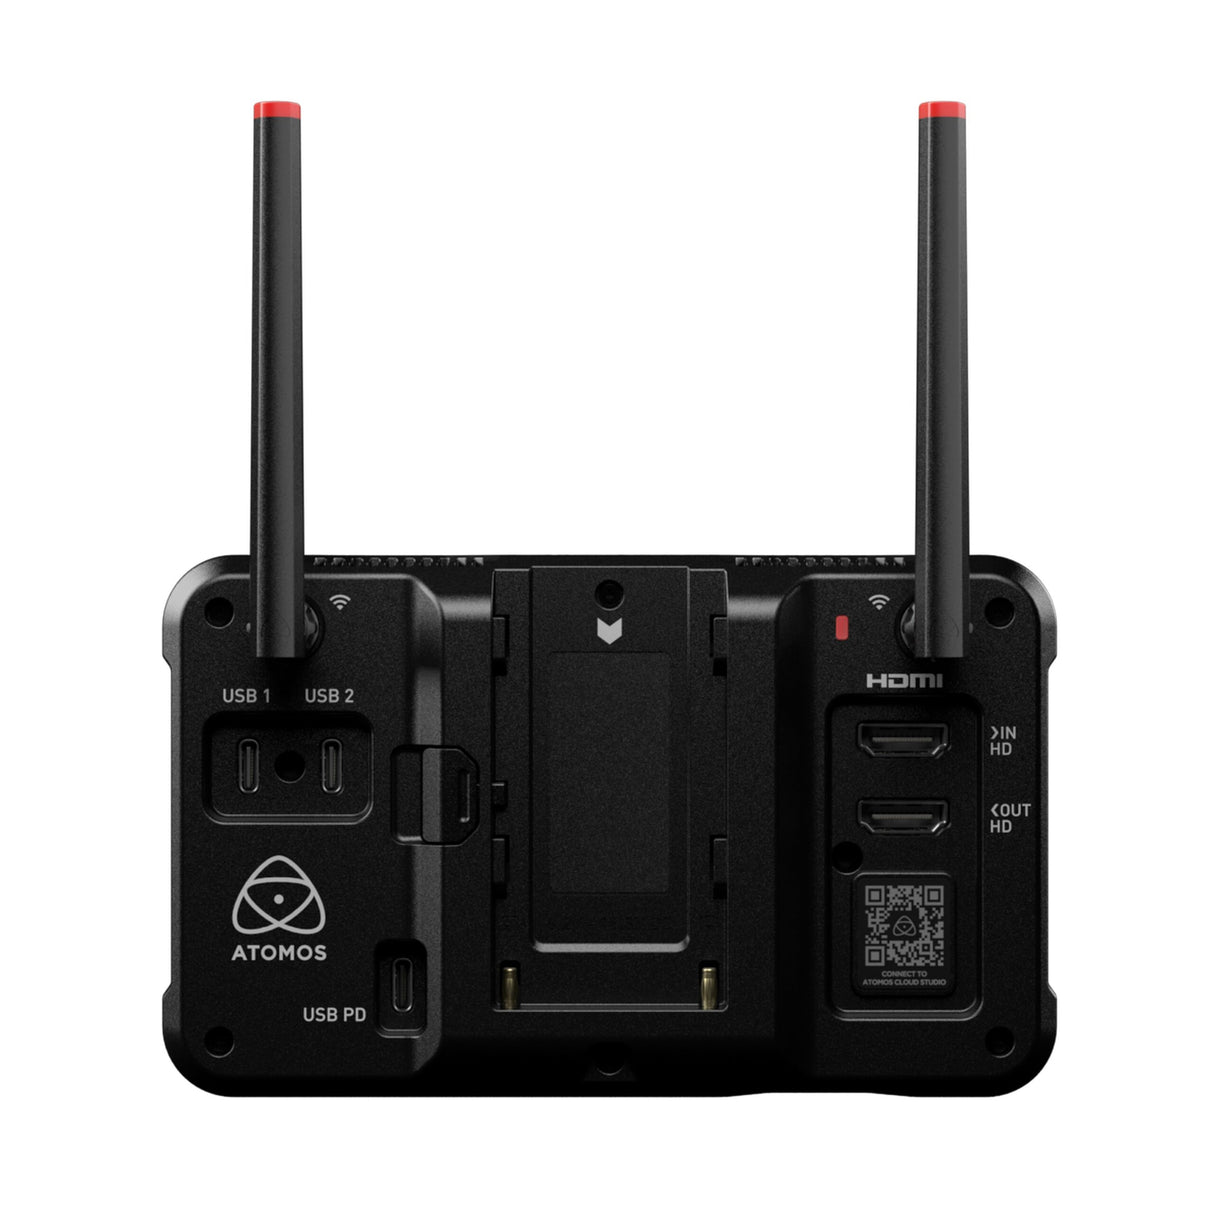 Atomos ZATO CONNECT 5-Inch Network Connected Monitor and Encoder